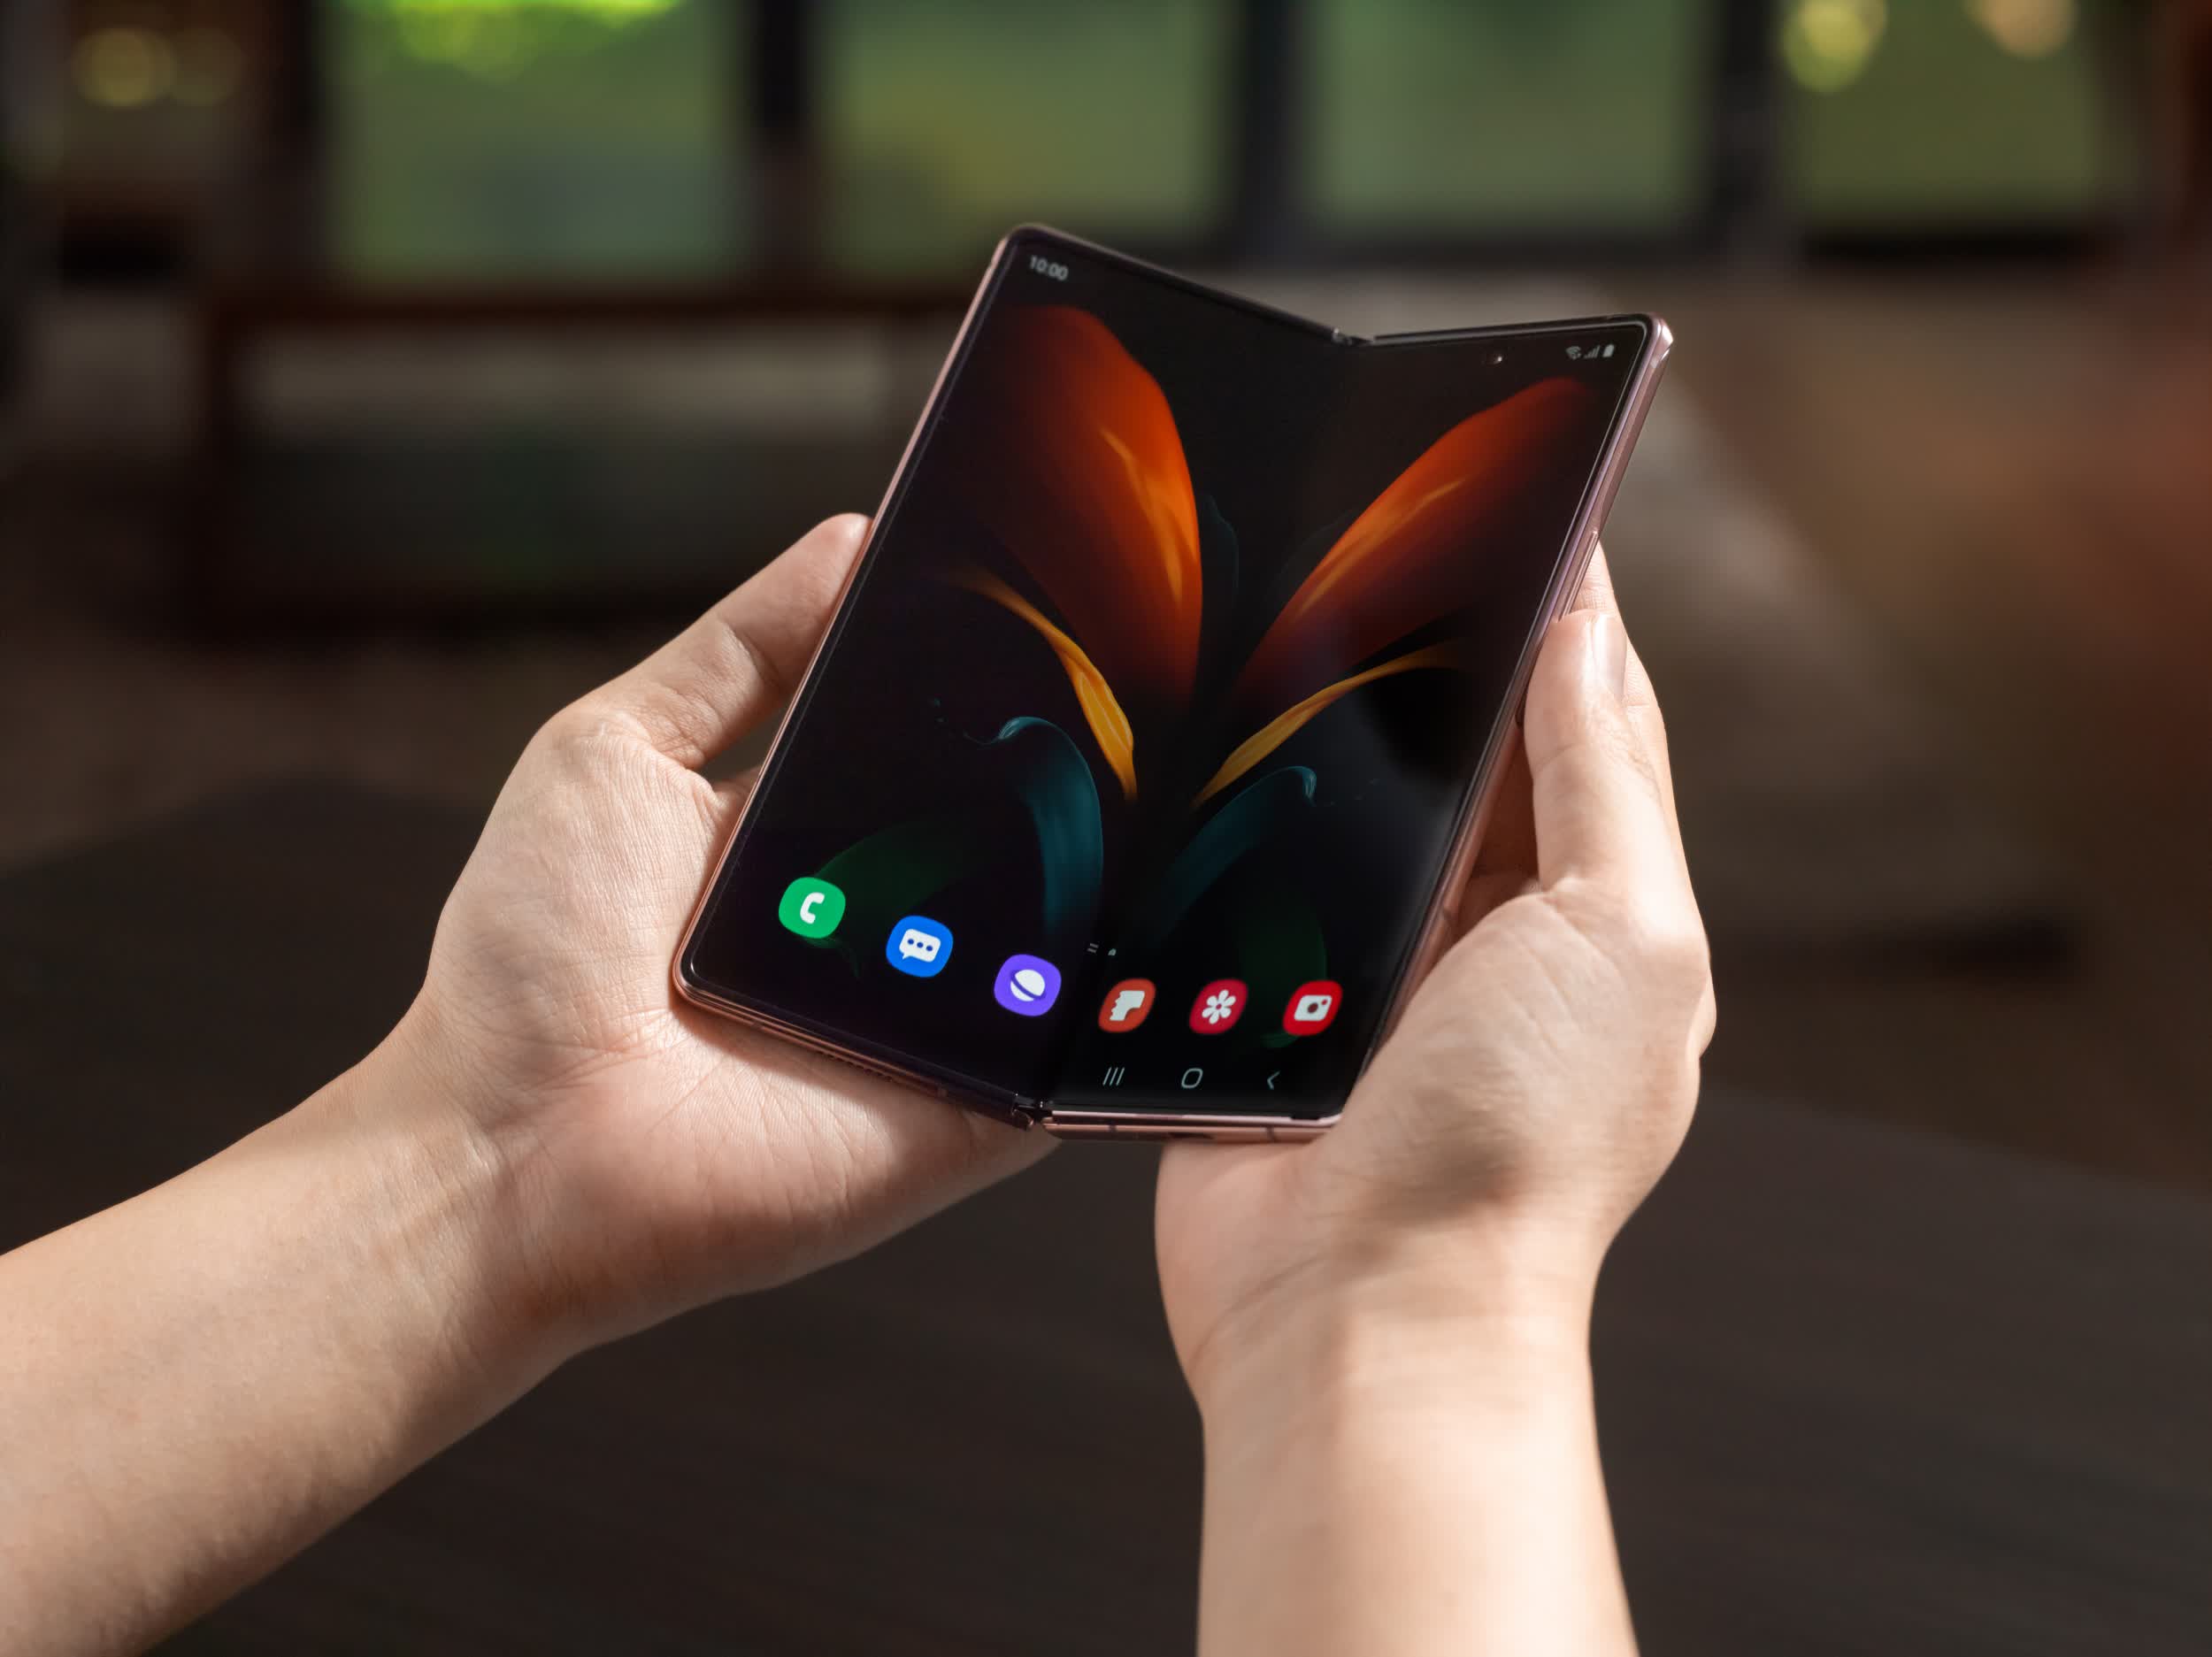 Samsung's Galaxy Z Fold 2 screen can still be scratched with your fingernail